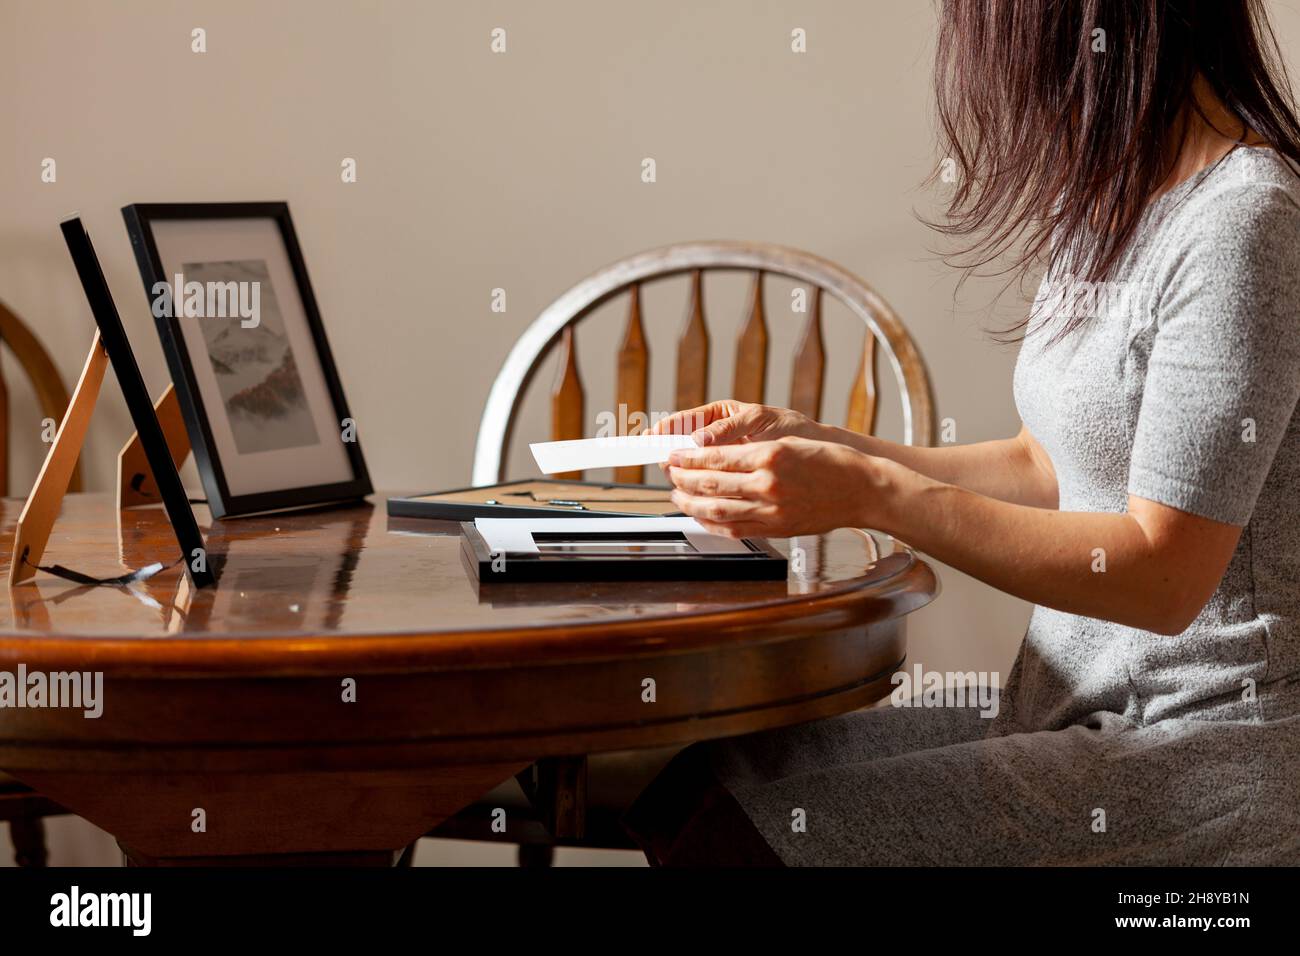 A young caucasian woman is placing a printed photograph into a picture frame with kickstand. There are other frames on the table. Tabletop picture fra Stock Photo